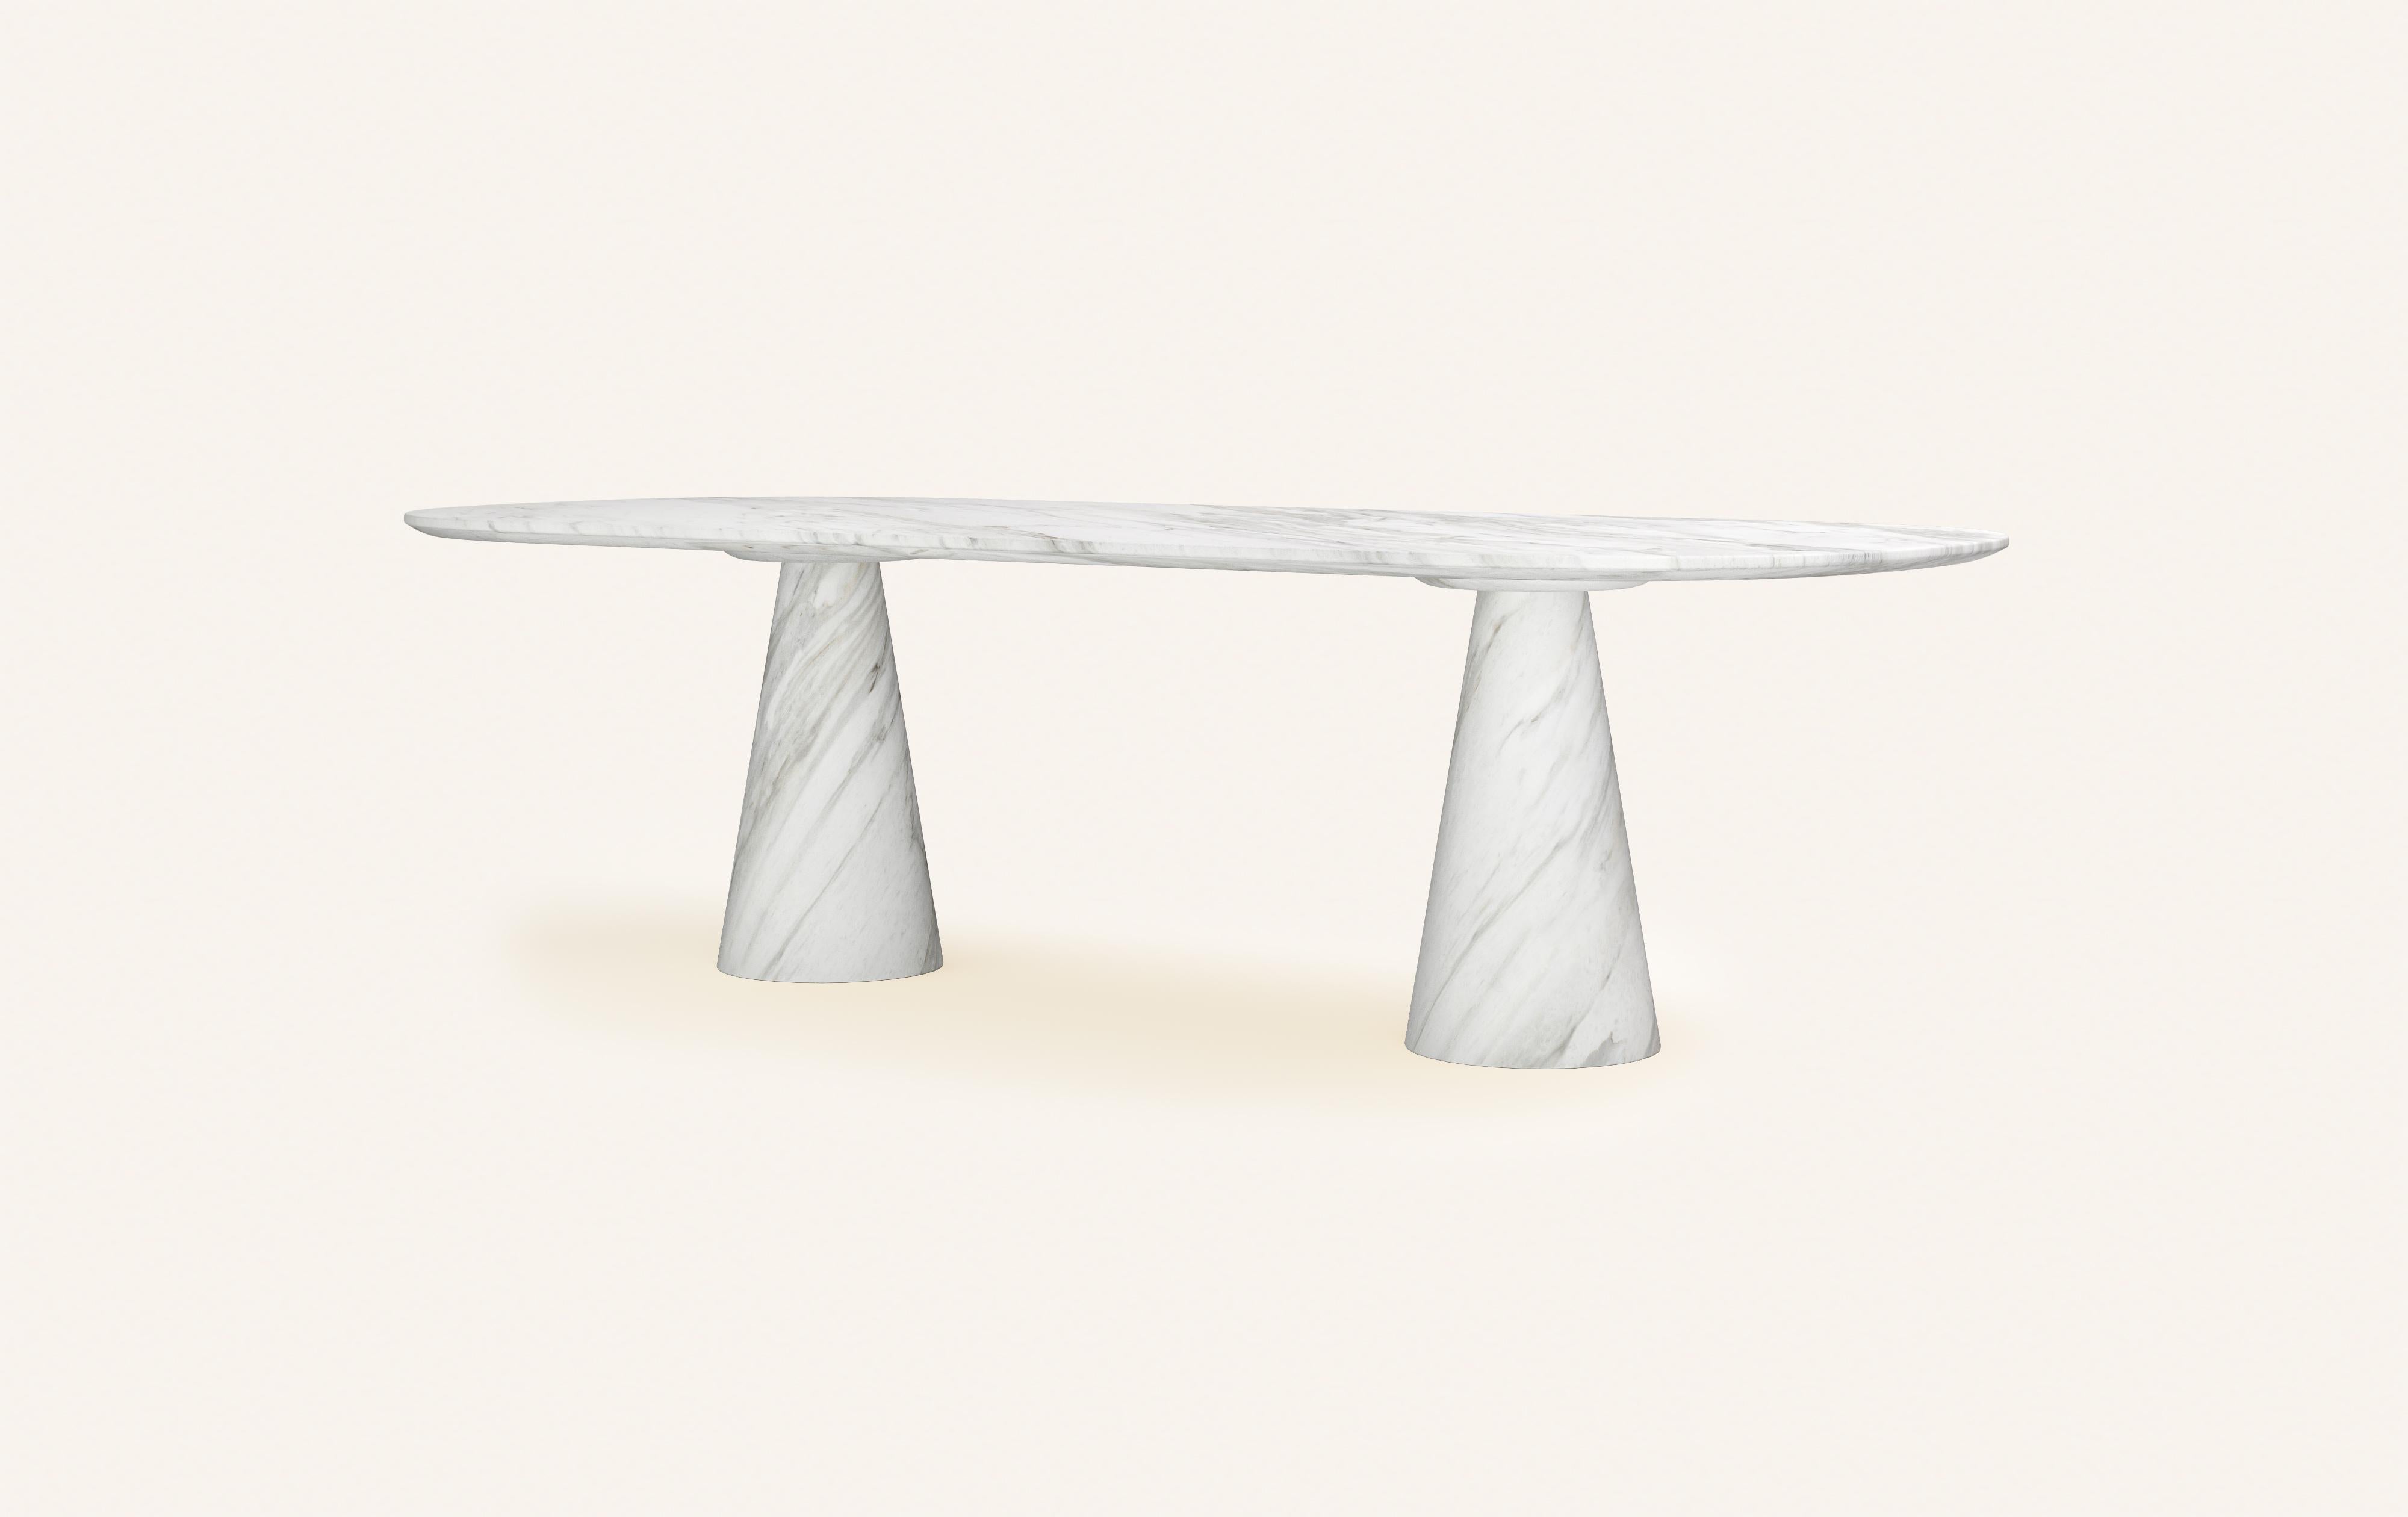 Organic Modern FORM(LA) Cono Oval Dining Table 108”L x 48”W x 30”H Volakas White Marble For Sale